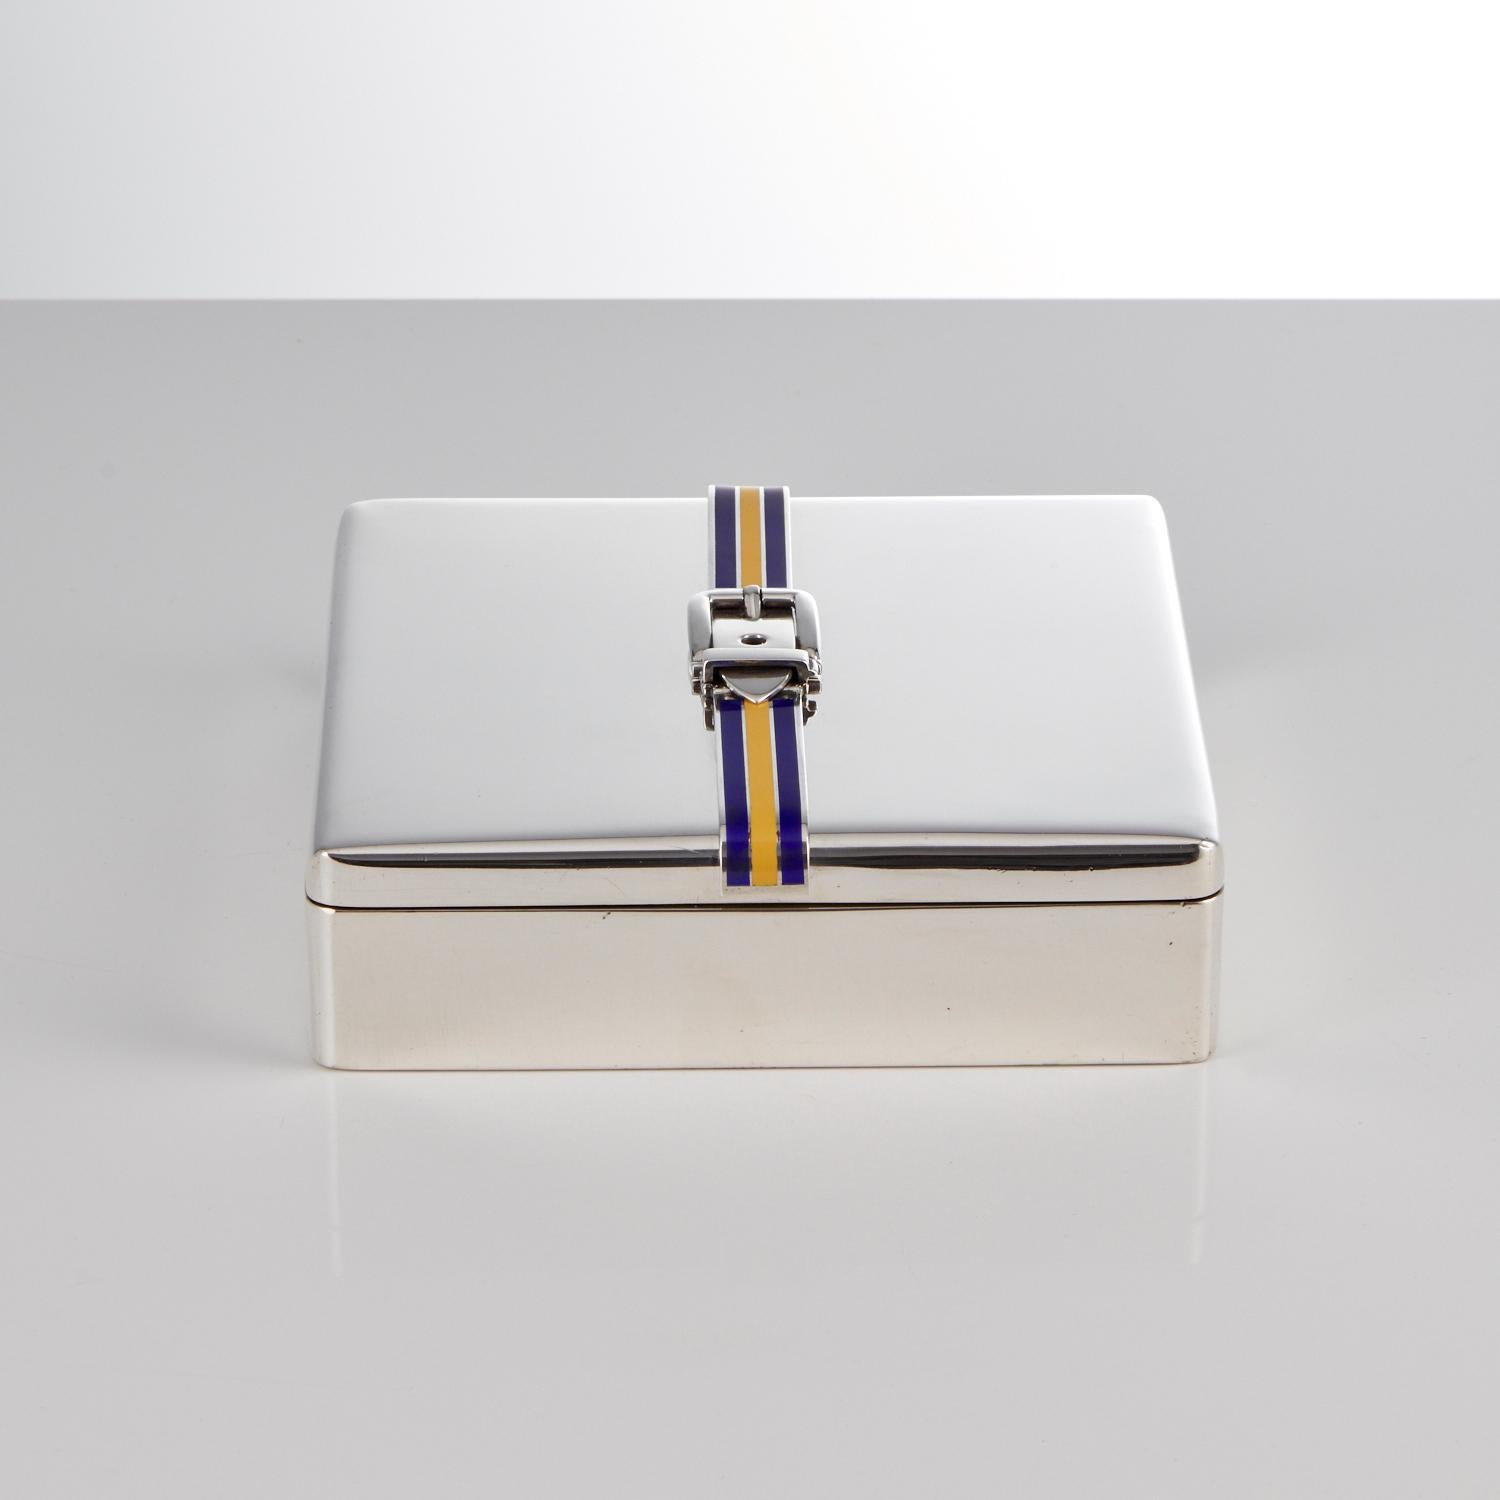 925 Sterling Silver & Enamel Box with Strap Detail Italy circa 1960 For Sale 1